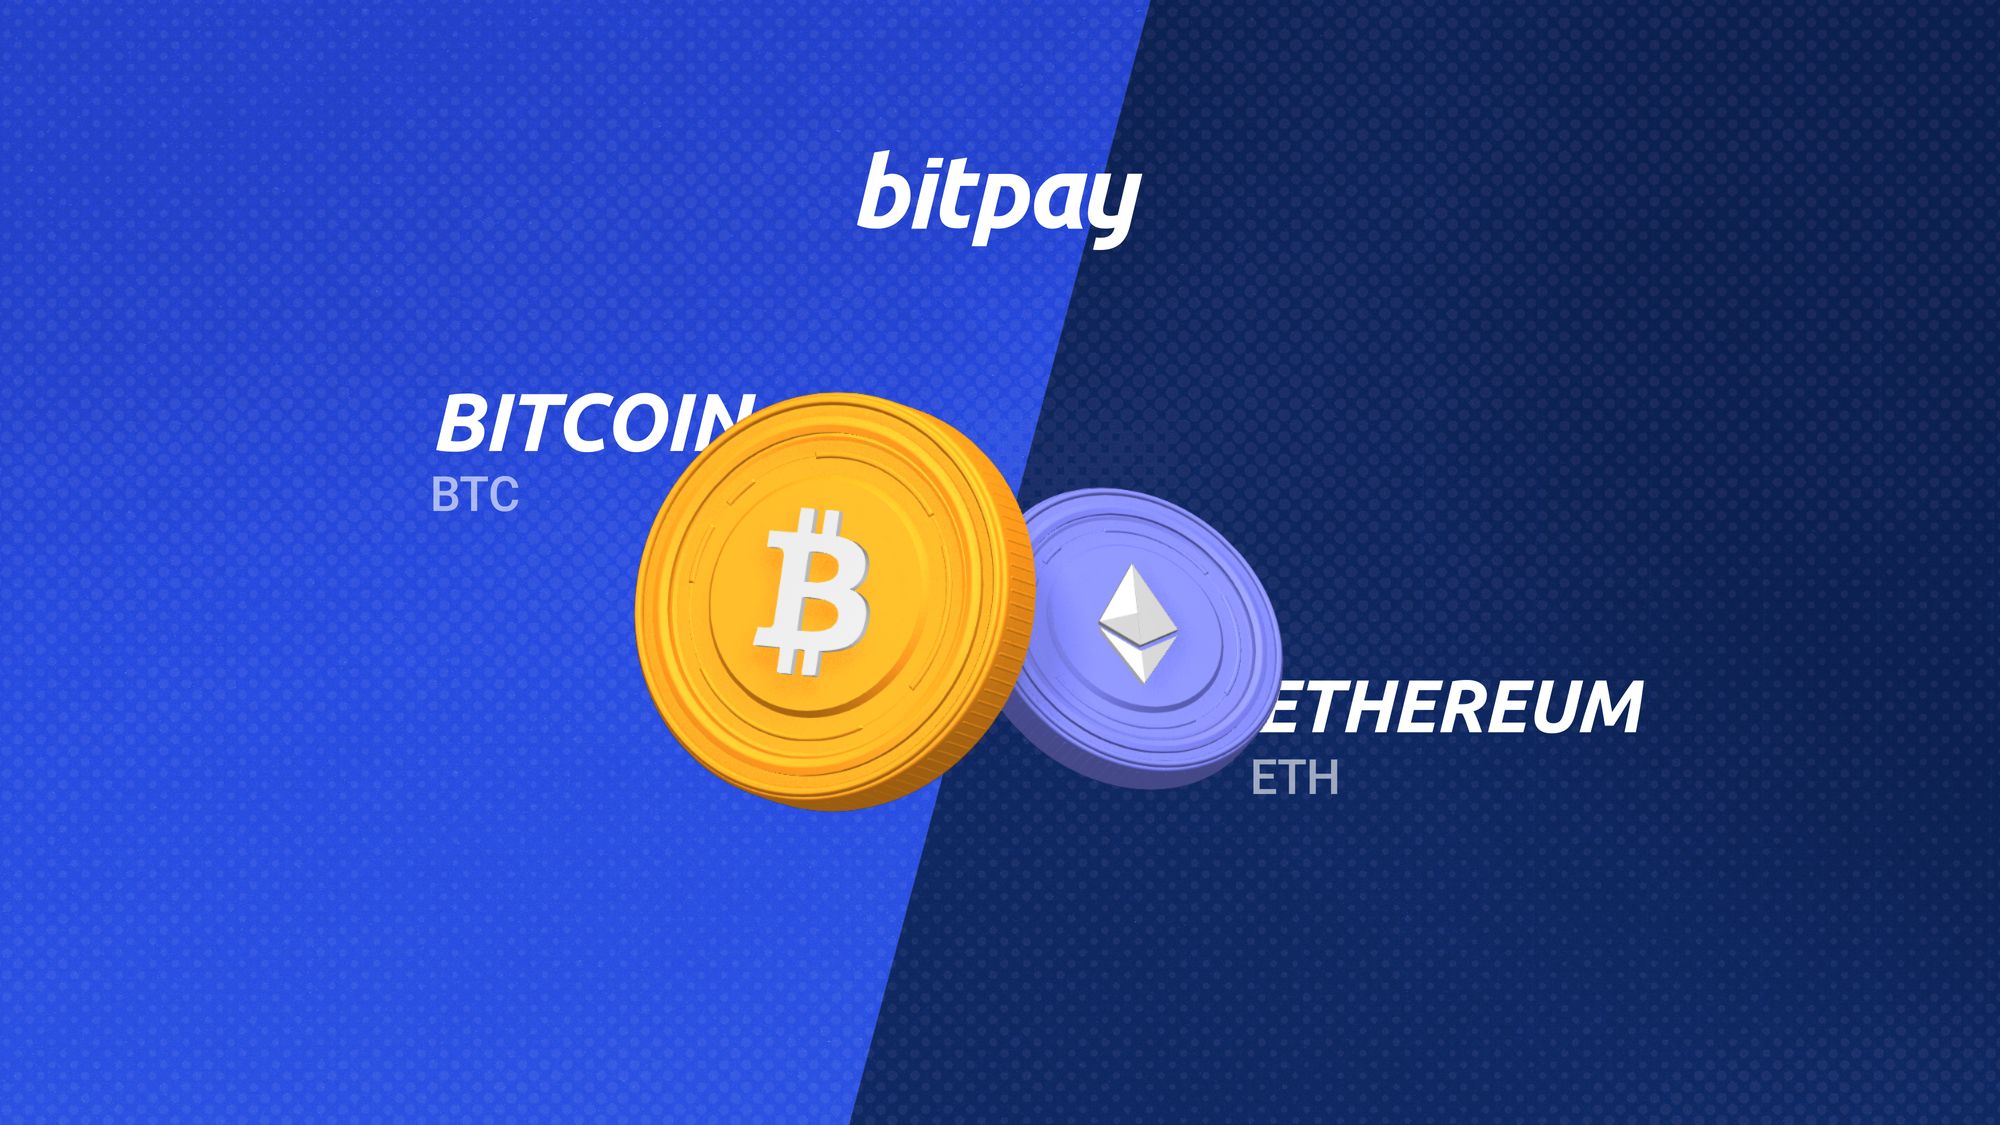 Ethereum vs Bitcoin: which project has the upper hand in 2020?